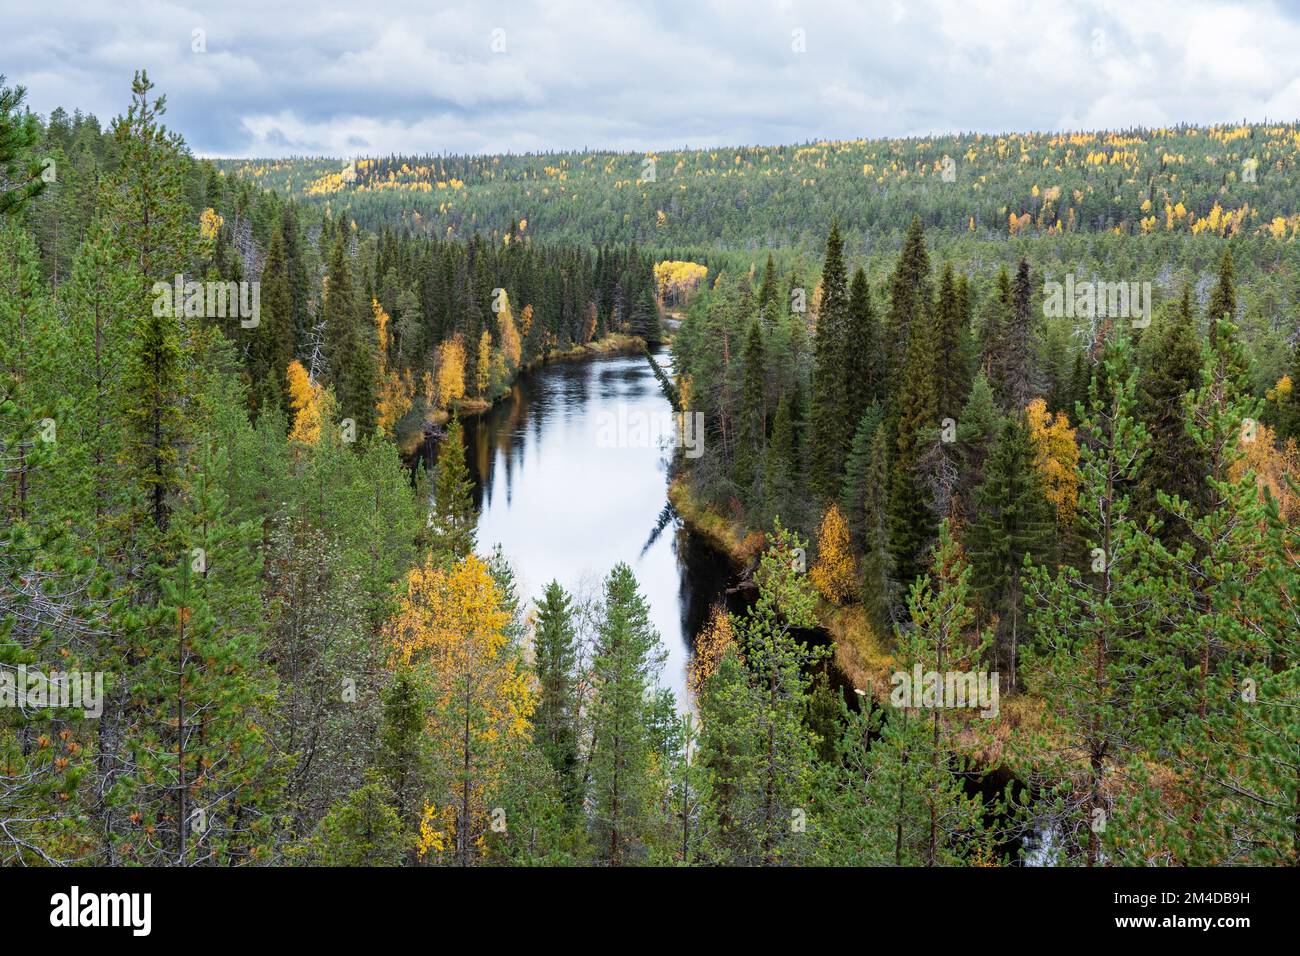 A view to river Oulankajoki and tall Spruce trees on an autumn day in Oulanka National Park, Northern Finland Stock Photo